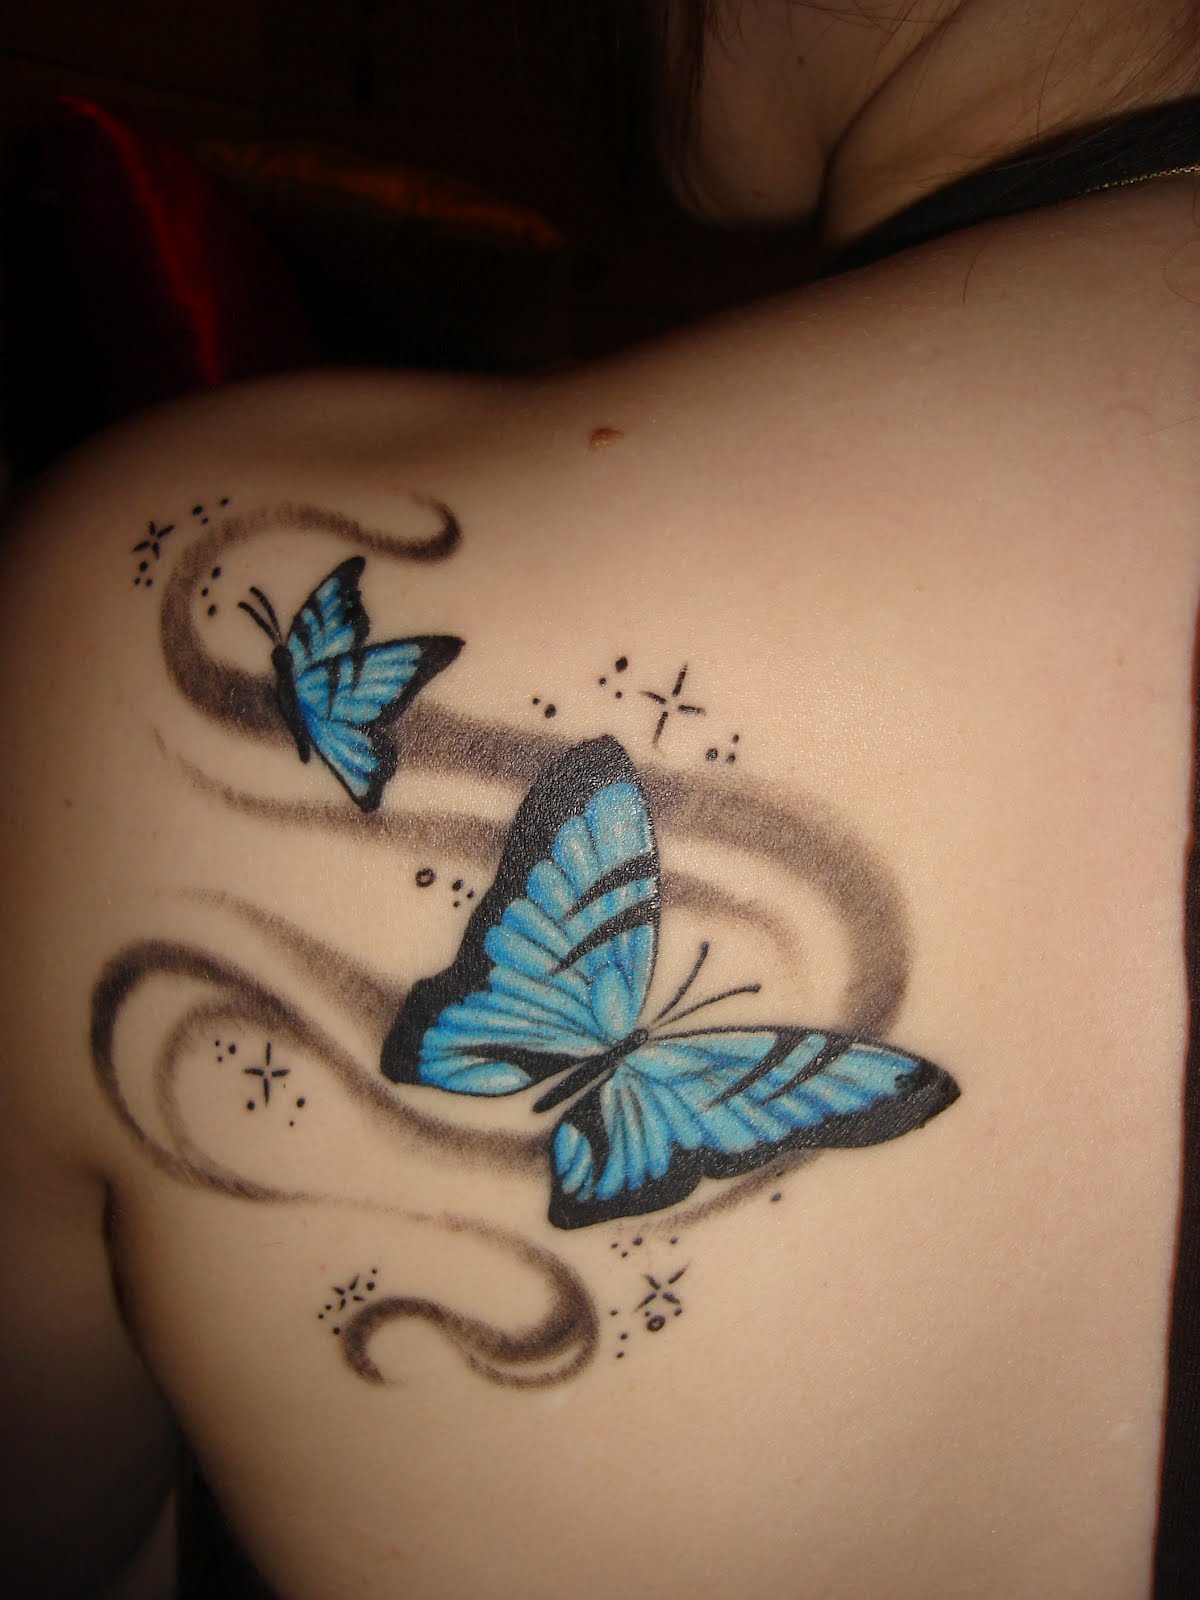 Tattoo Styles For Men and Women: Butterfly Tattoo Designs Pictures